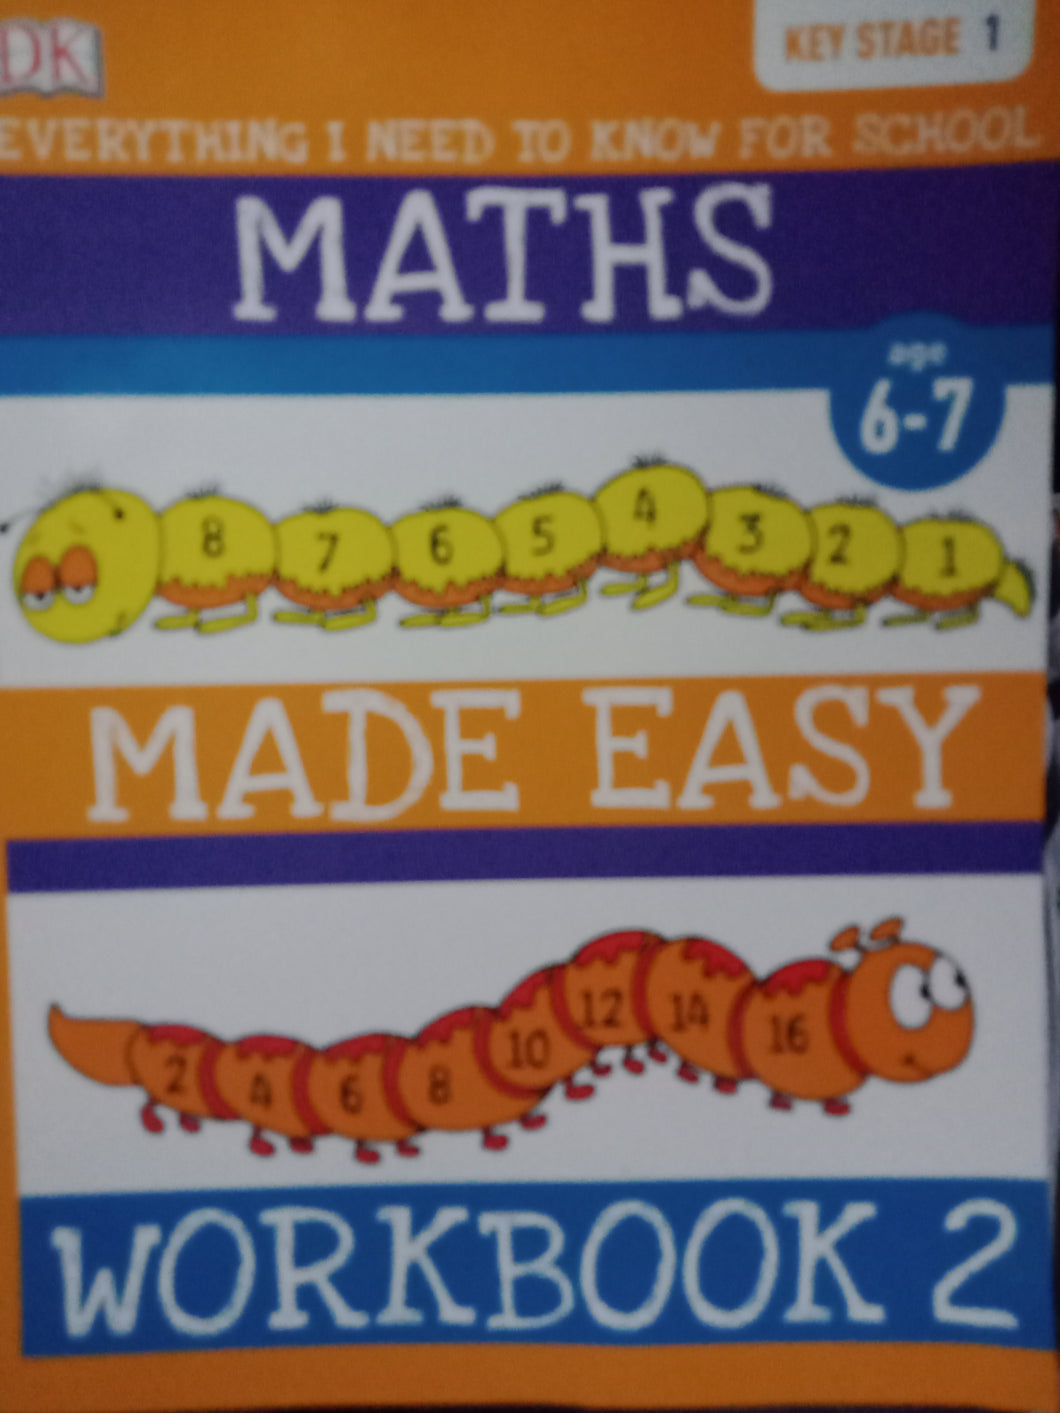 Everything I Need To Know For School Maths Made Easy Workbook 2 - Books for Less Online Bookstore